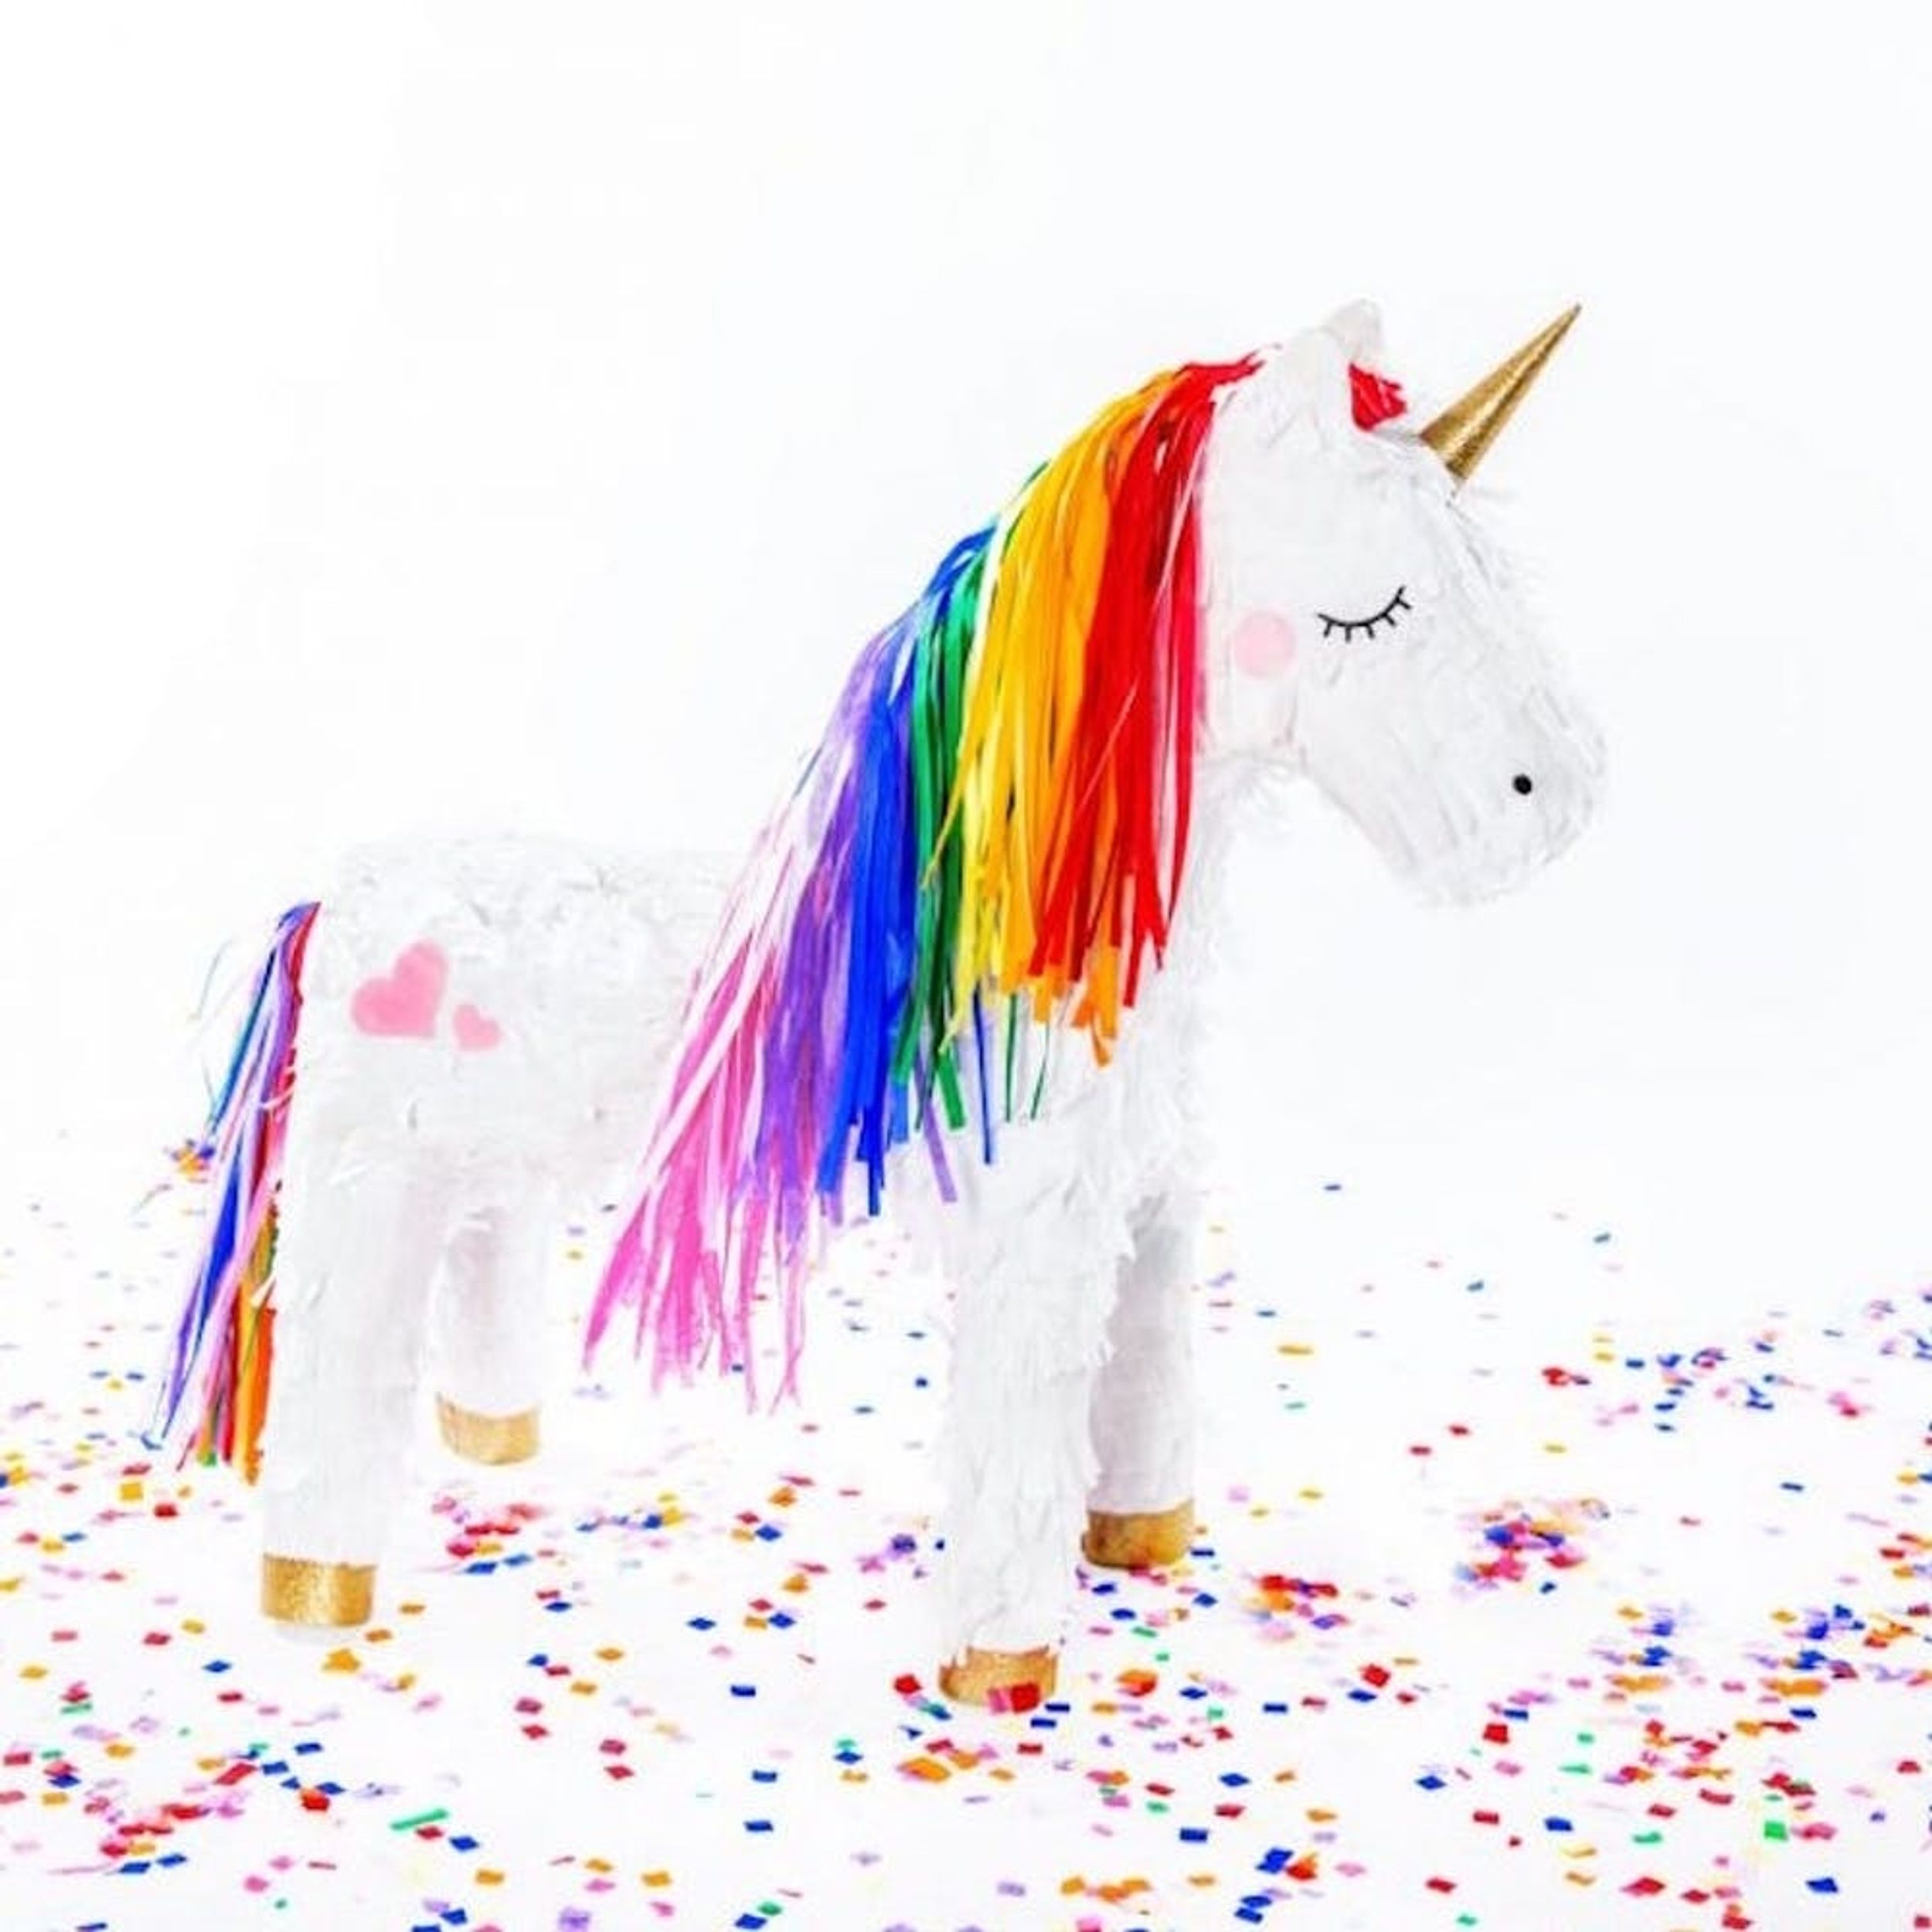 18 Colorful Ideas for Your Lisa Frank-Inspired 30th Birthday Party